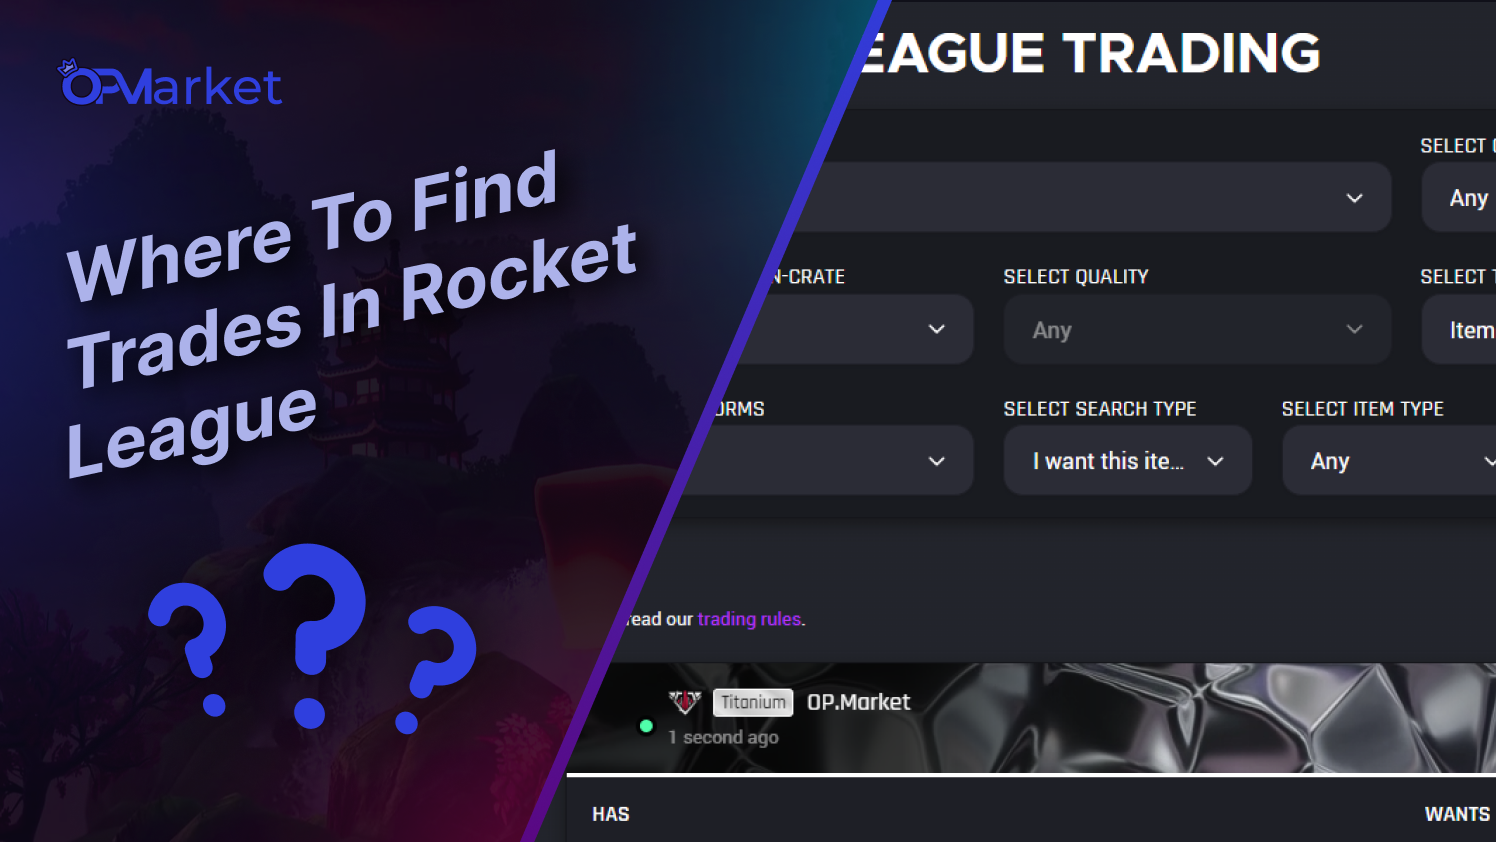 Where To Find Trades in Rocket League?